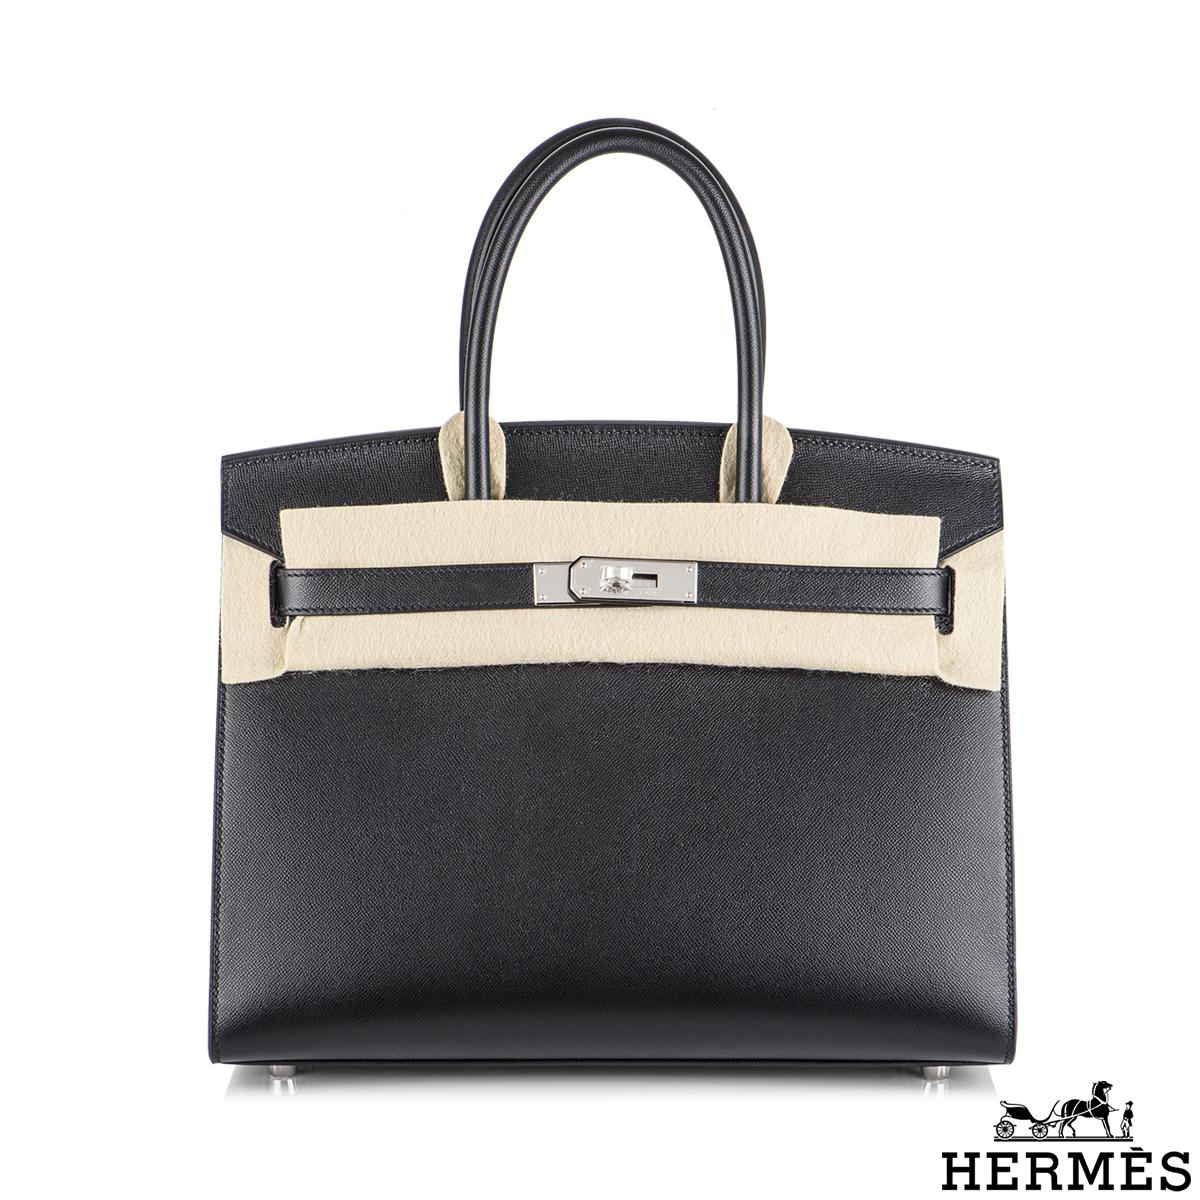 An exquisite Hermès Sellier Birkin 30 bag. The exterior of this birkin features veau madame leather in black. The black leather is complimented with palladium hardware. This birkin is in Sellier style which features topstitching on the outside, this